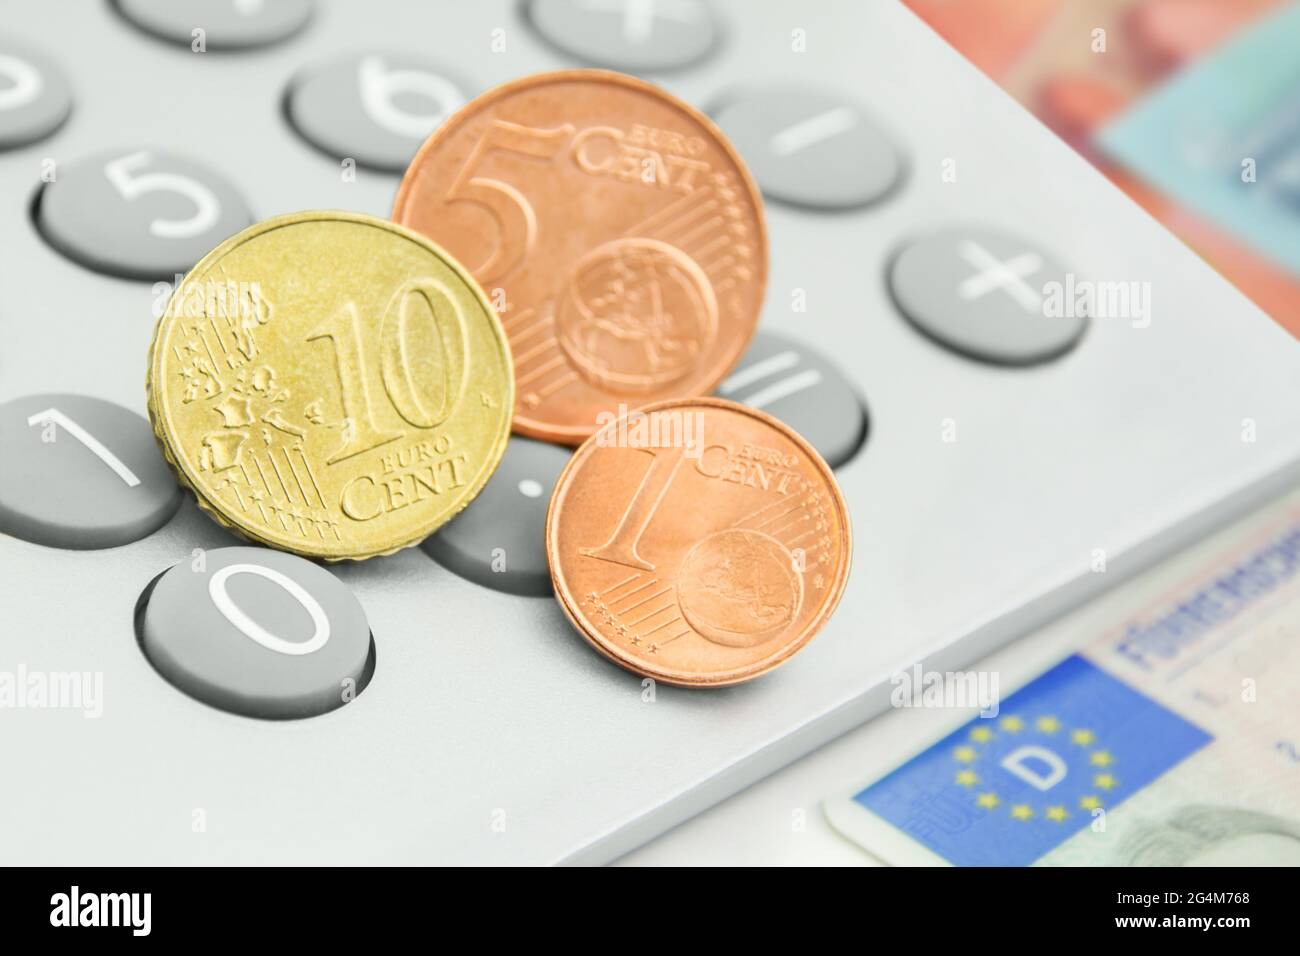 Calculator and 16 Cent Euro with German driving licence Stock Photo